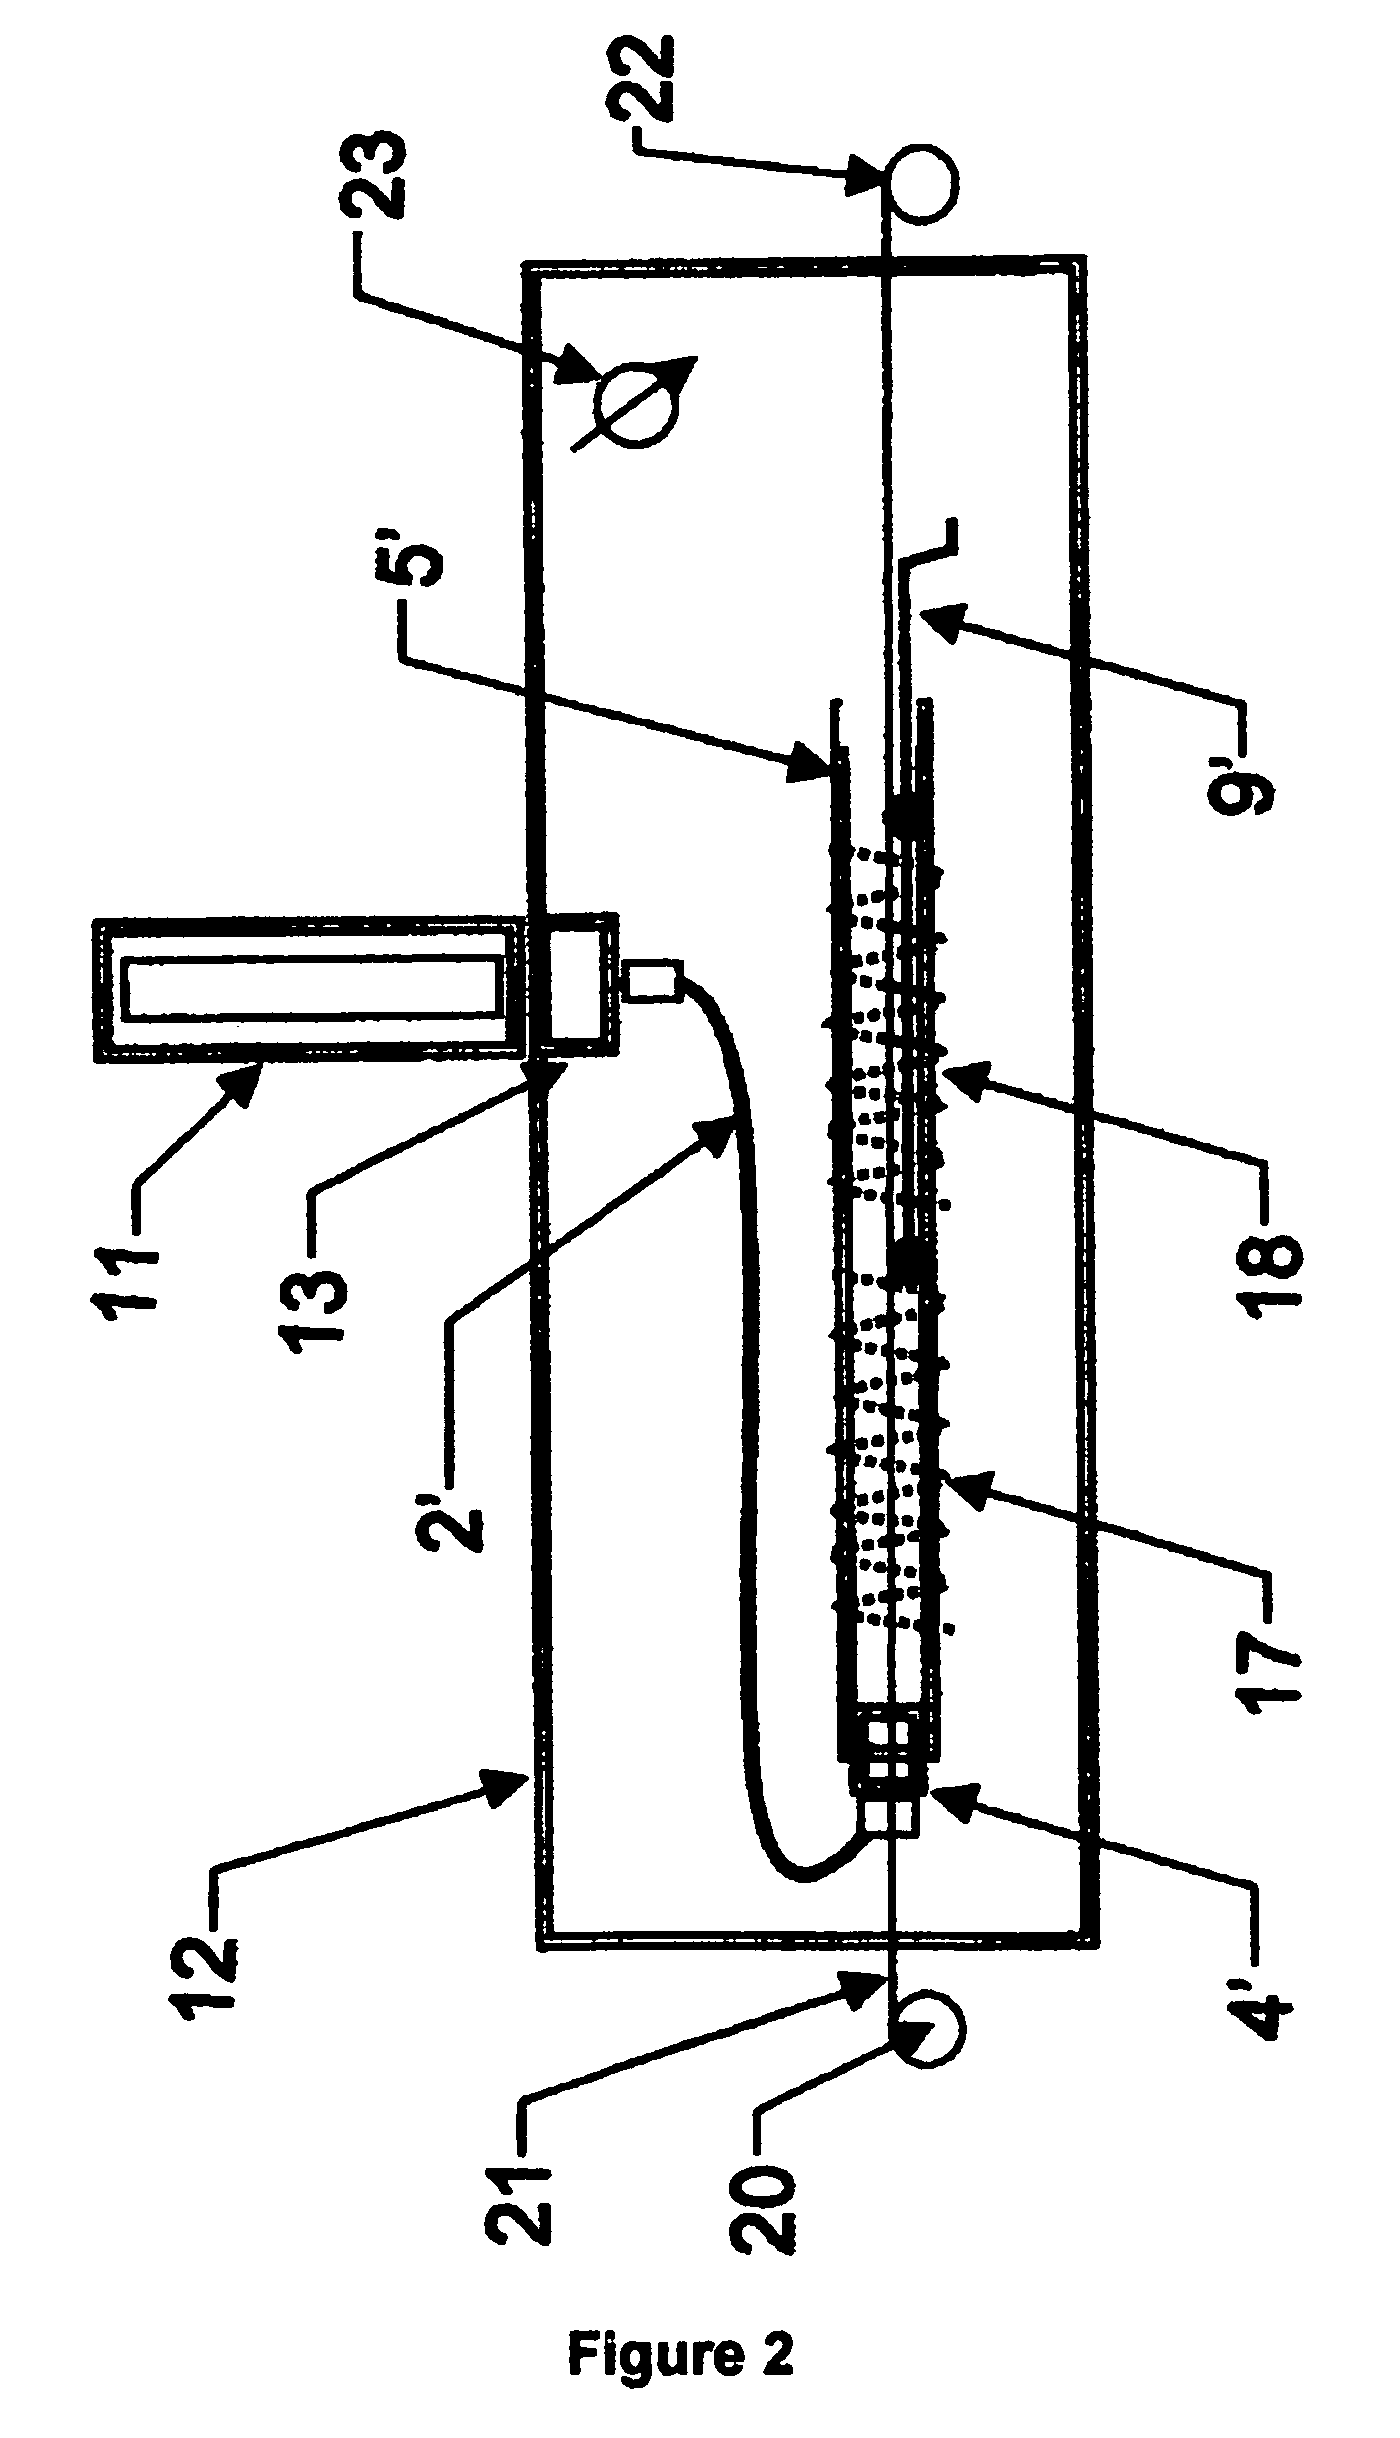 Apparatus and method for stabilization or oxidation of polymeric materials